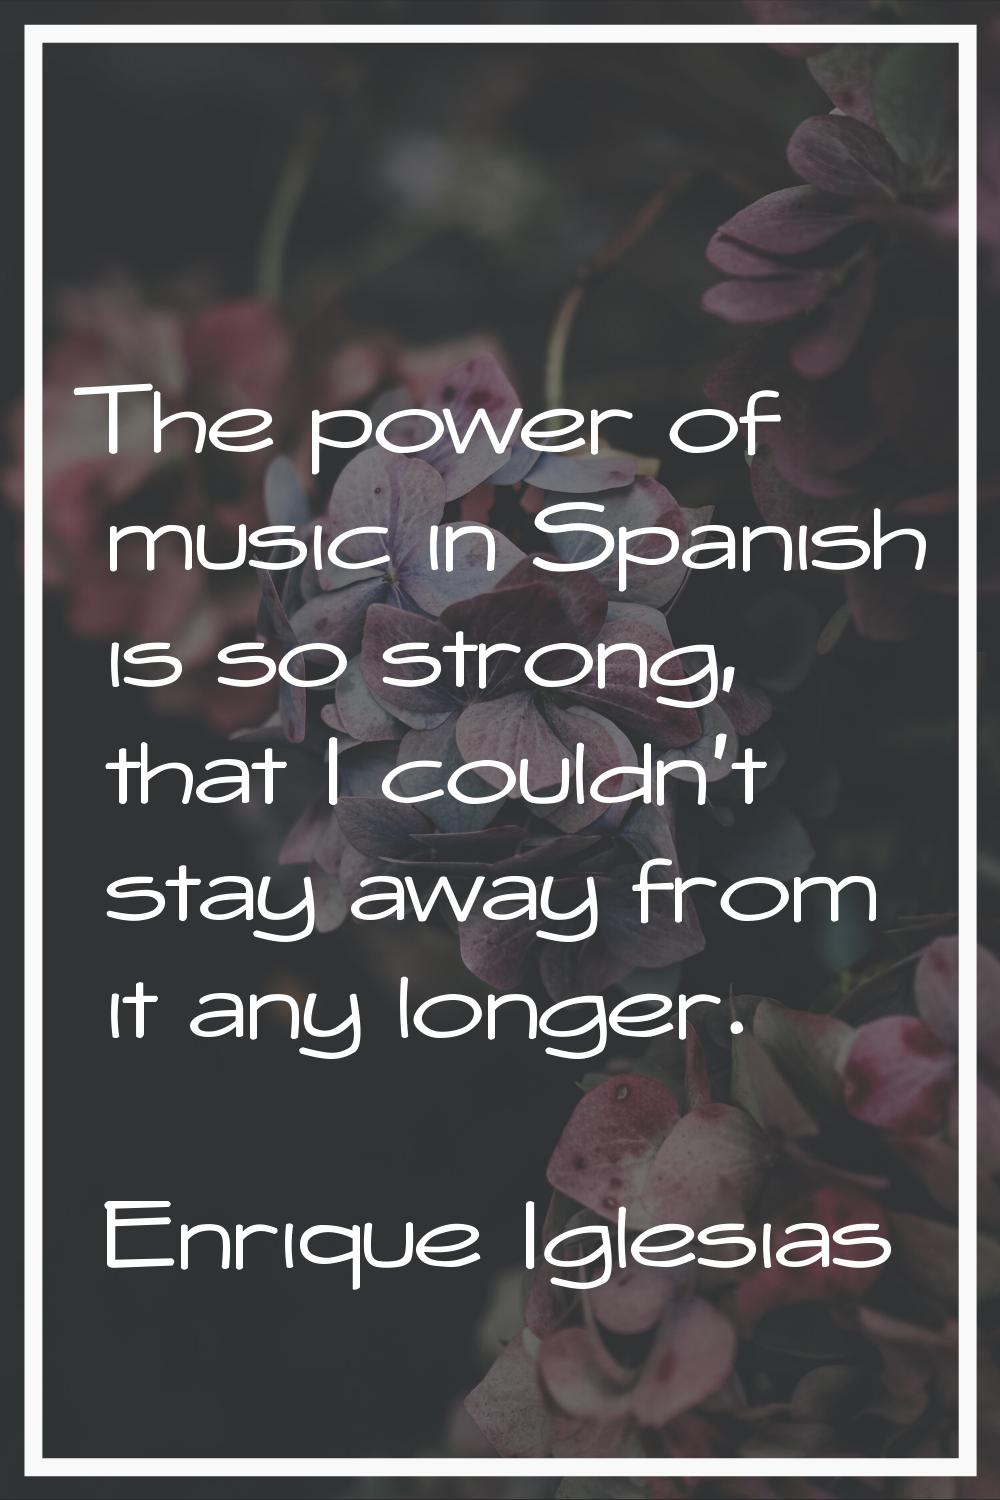 The power of music in Spanish is so strong, that I couldn't stay away from it any longer.